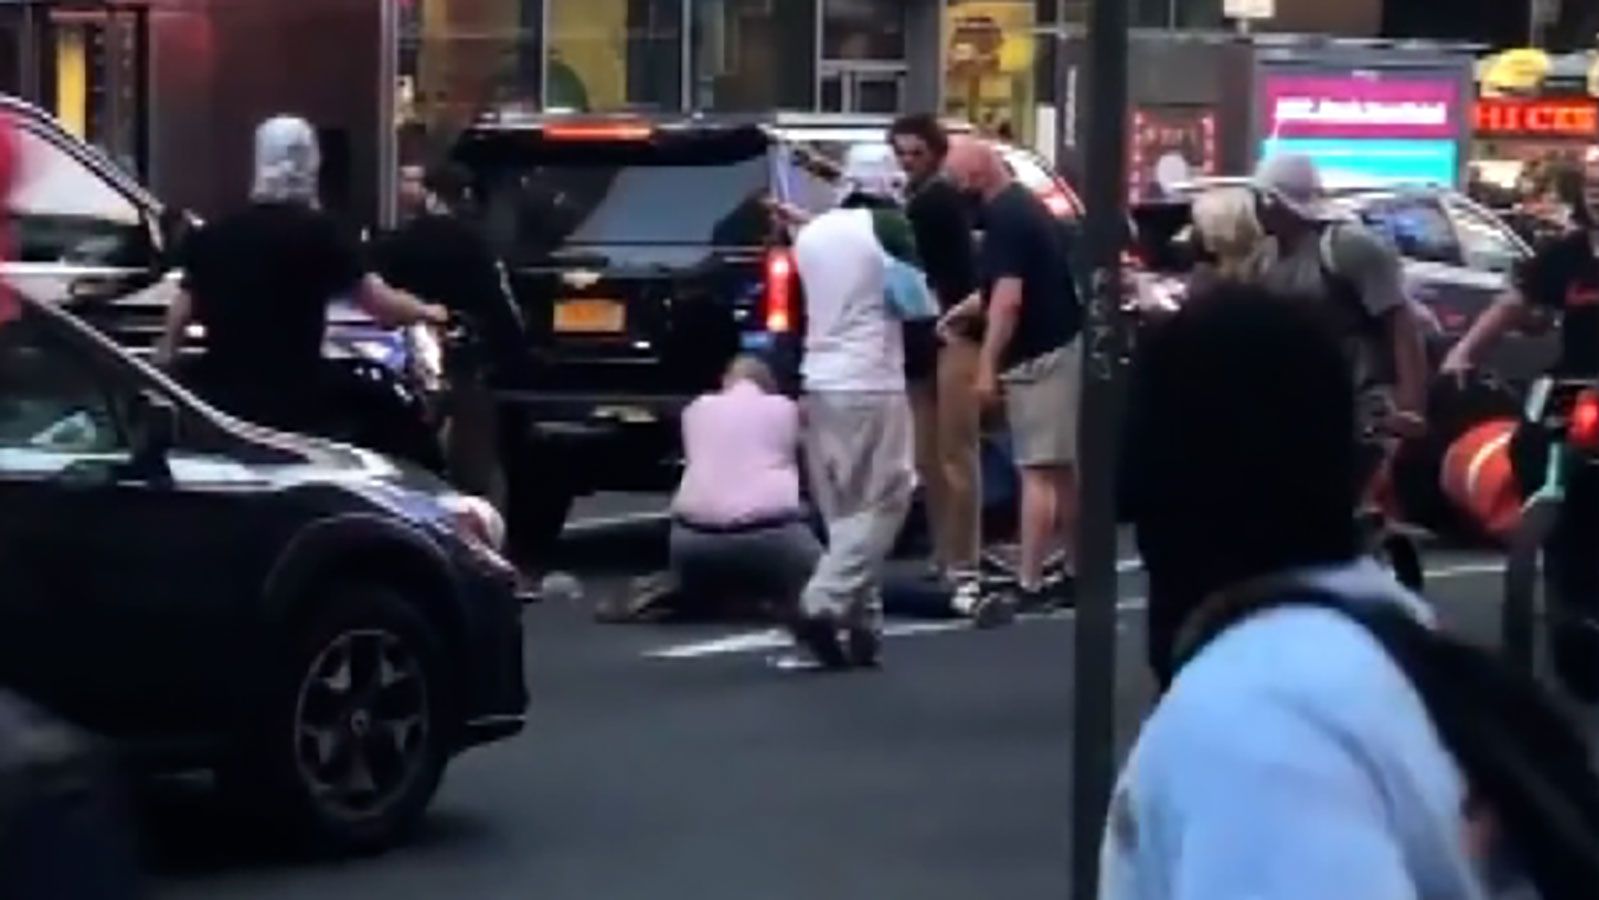 A bystander recorded video of an assault that took place Thursday in New York's Time Square.